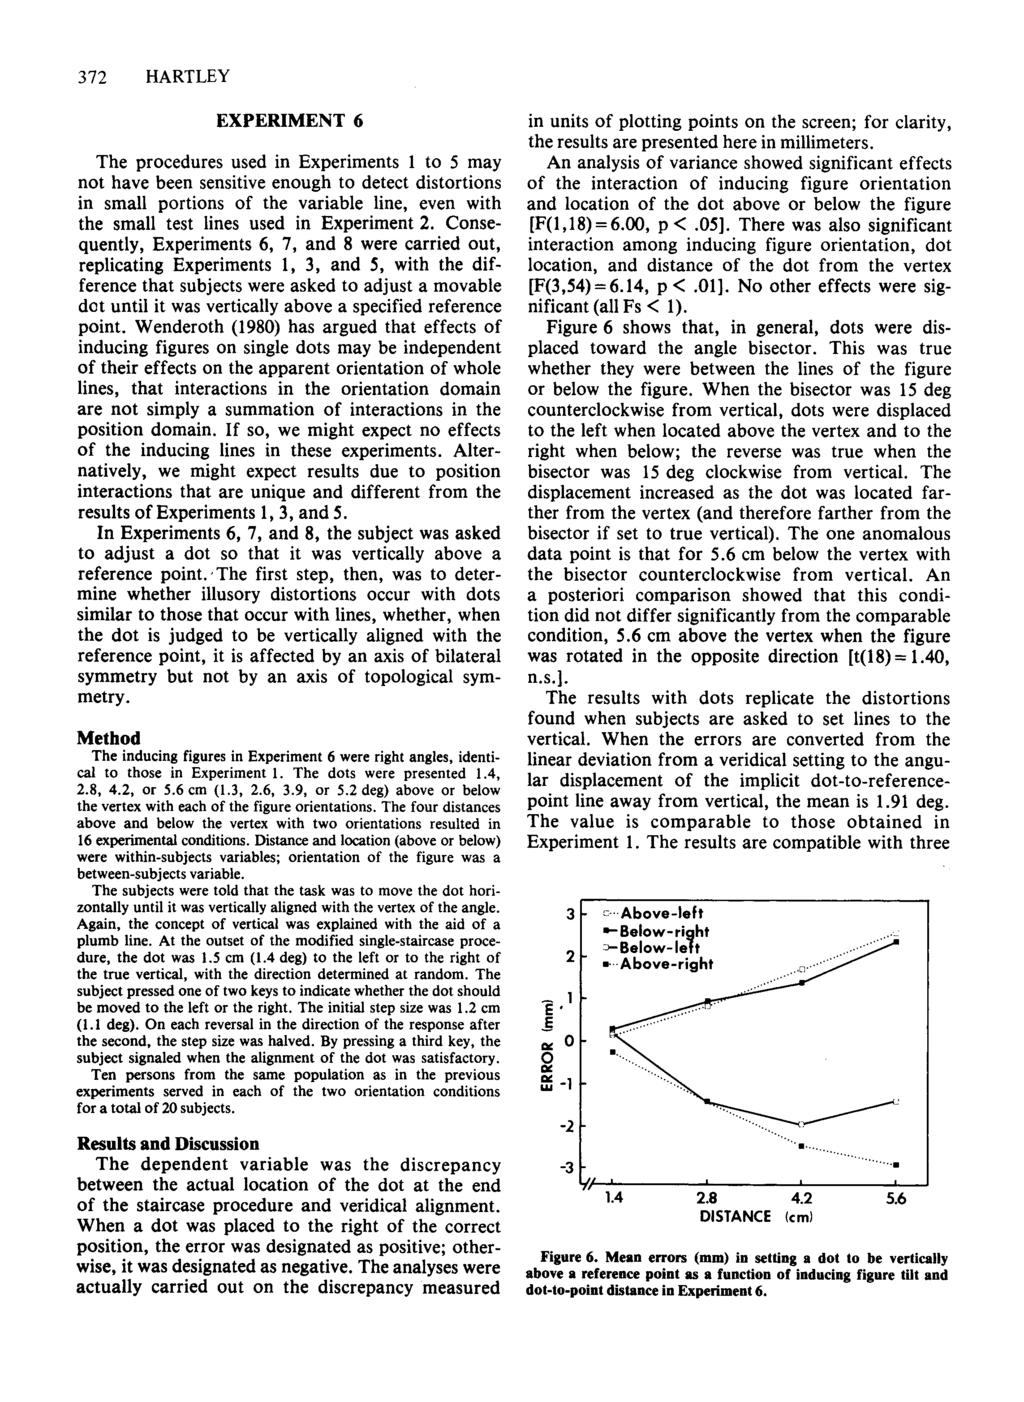 372 HARTLEY EXPERIMENT 6 The procedures used in Experiments 1 to 5 may not have been sensitive enough to detect distortions in small portions of the variable line, even with the small test lines used